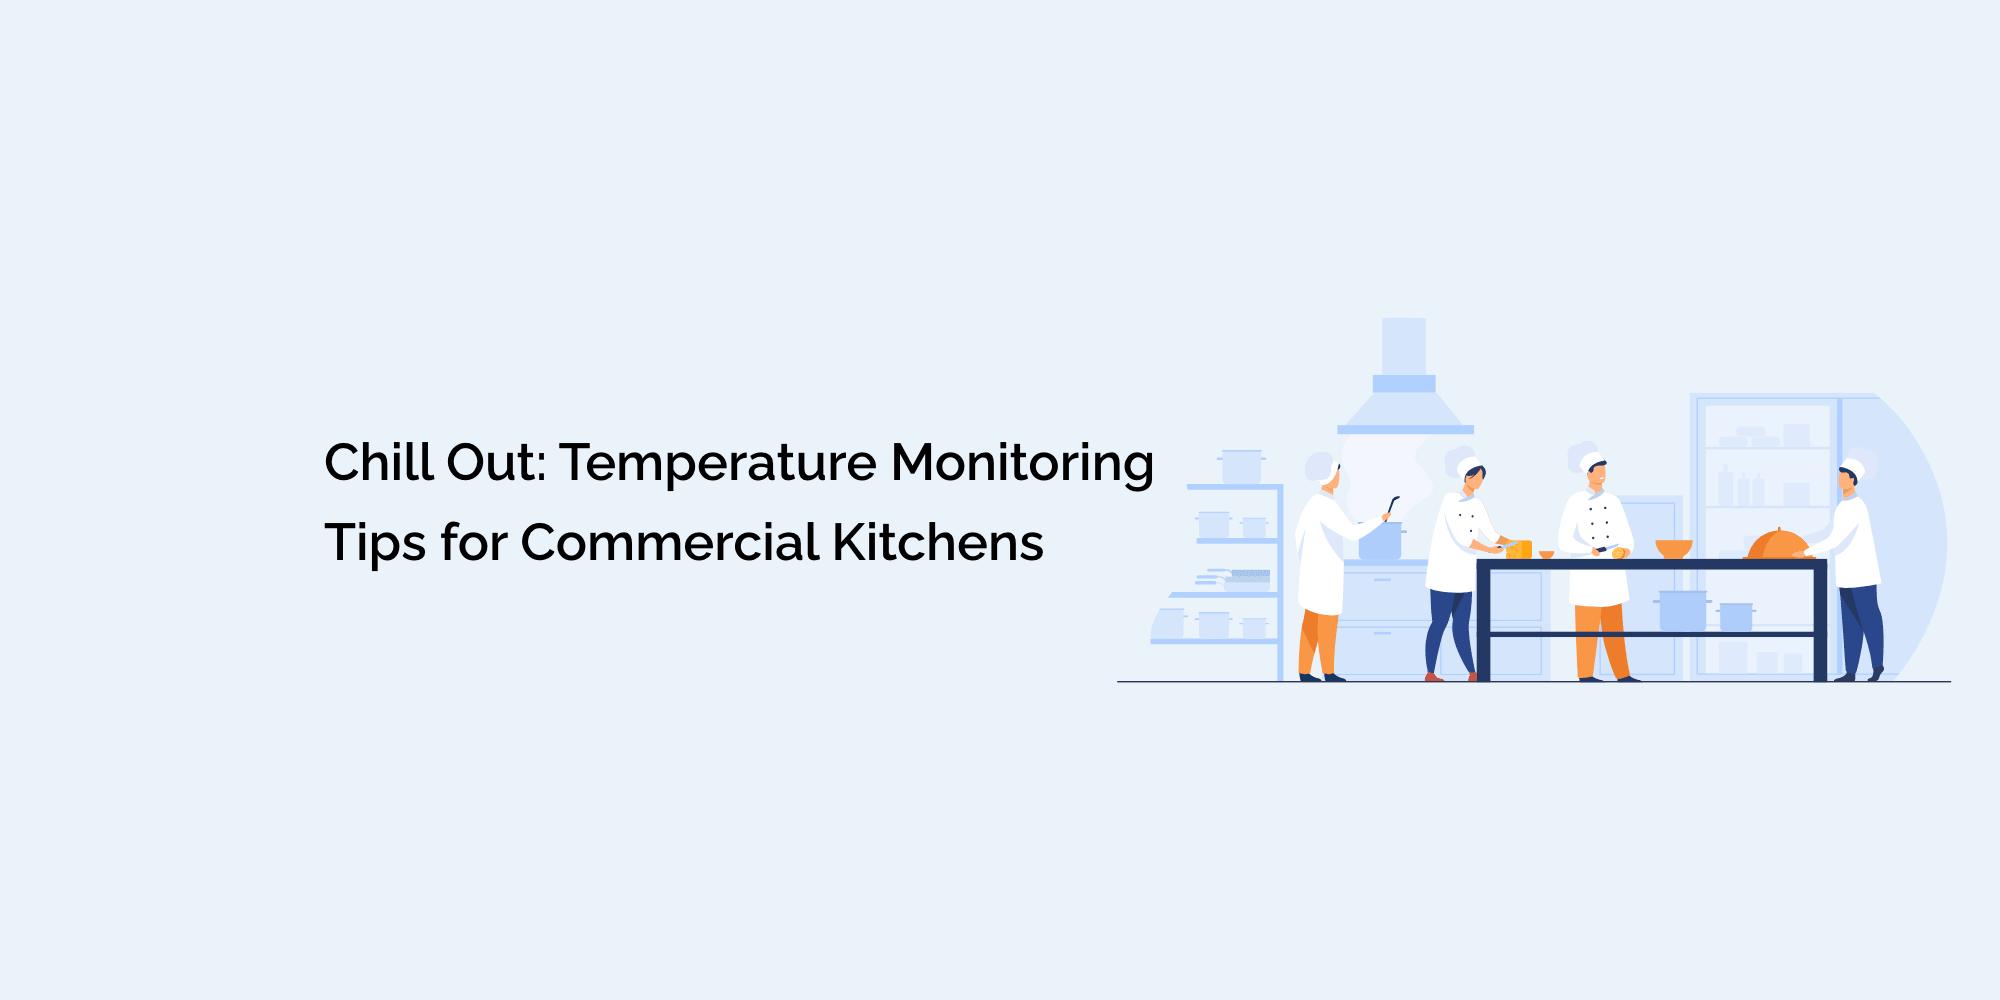 Chill Out: Temperature Monitoring Tips for Commercial Kitchens